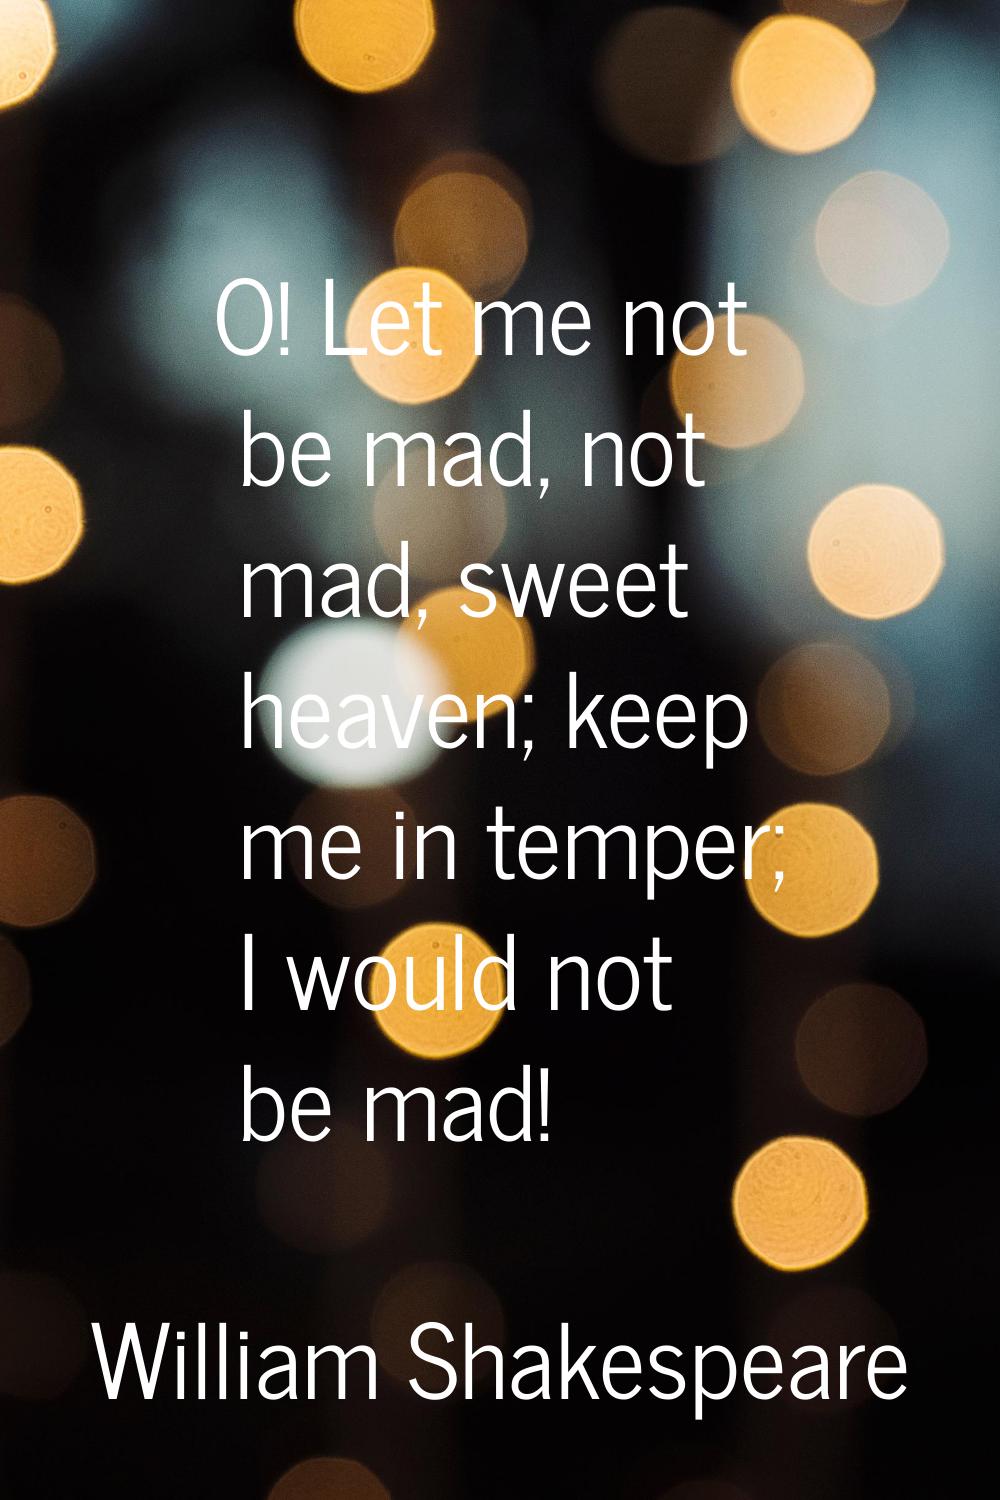 O! Let me not be mad, not mad, sweet heaven; keep me in temper; I would not be mad!